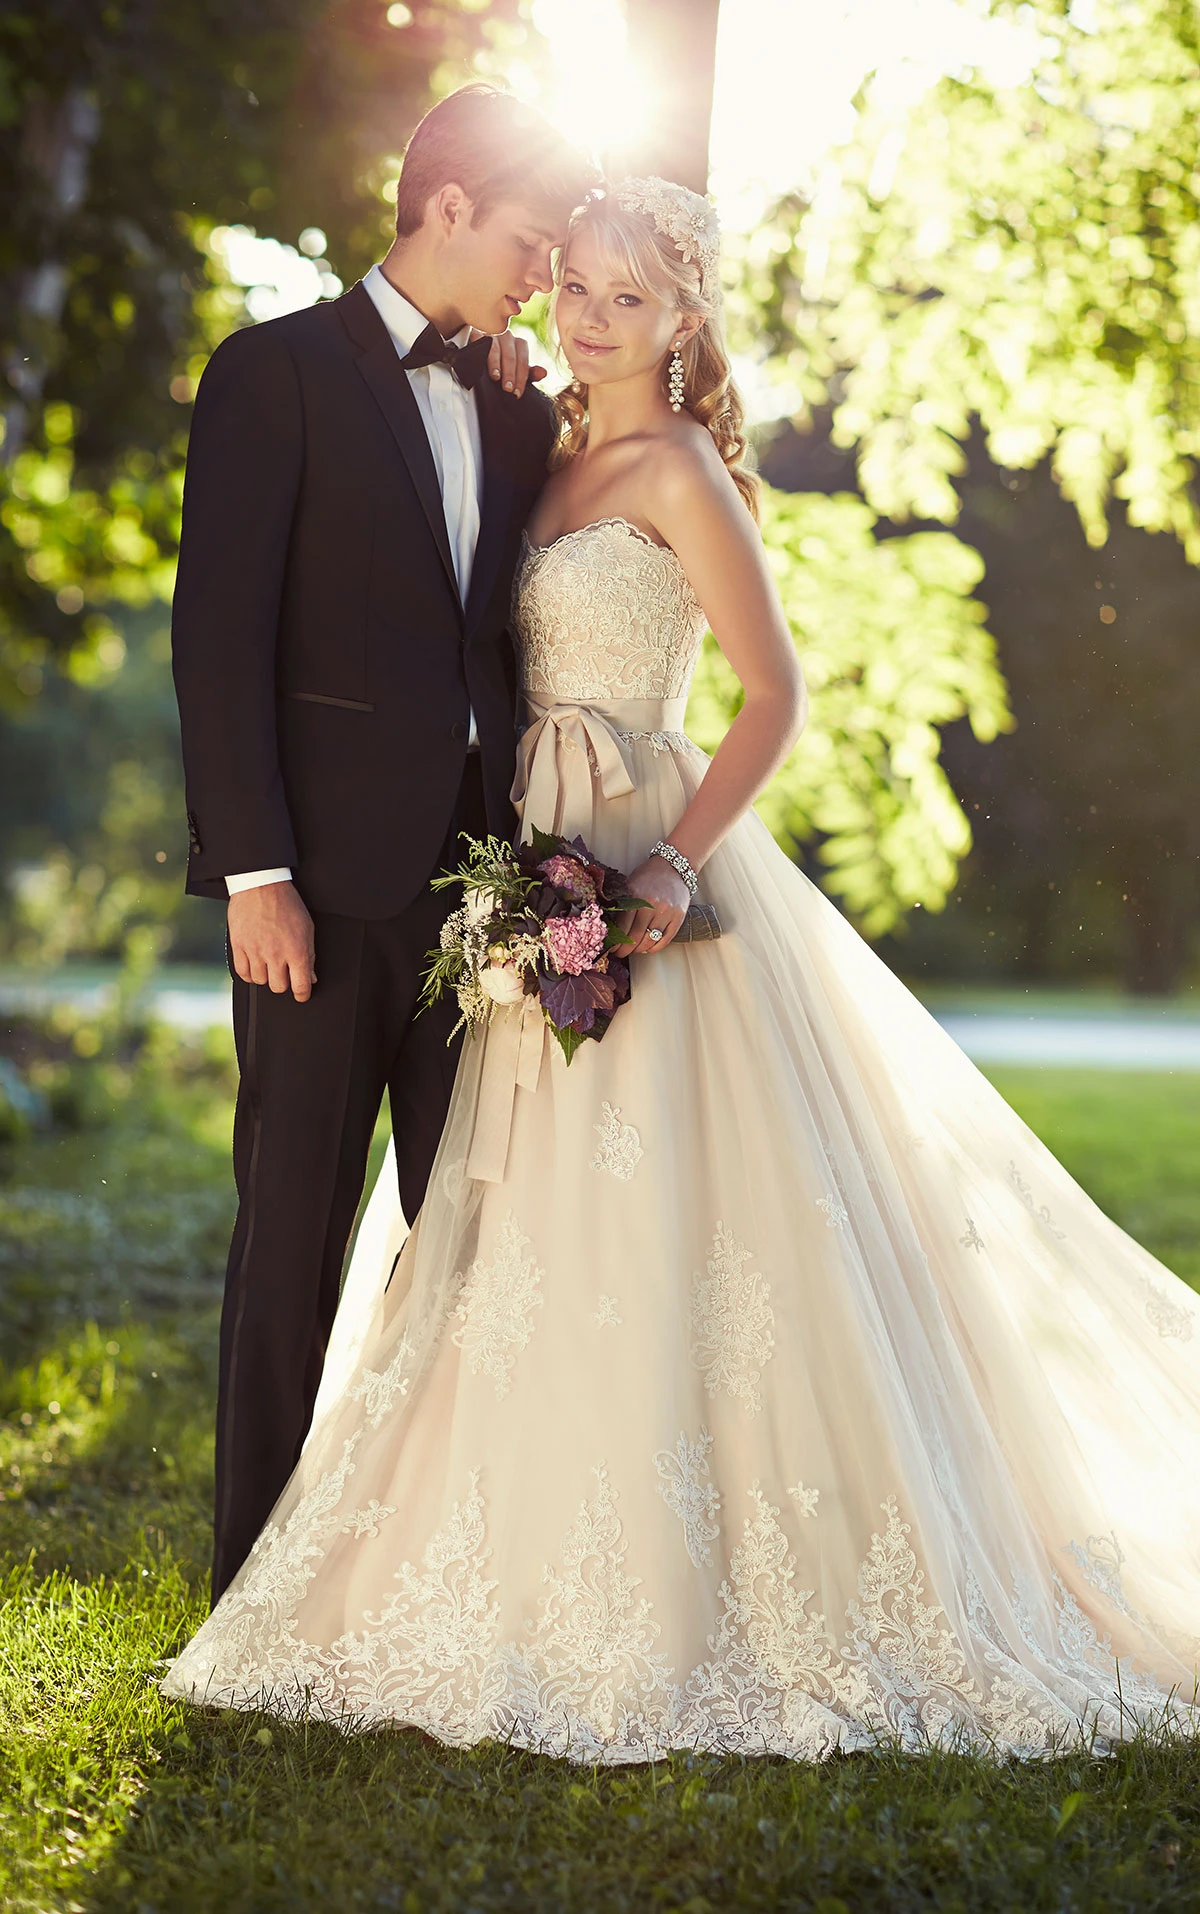 Lace on Tulle Designer Wedding Dress from Essense of Australia. Style D1751.